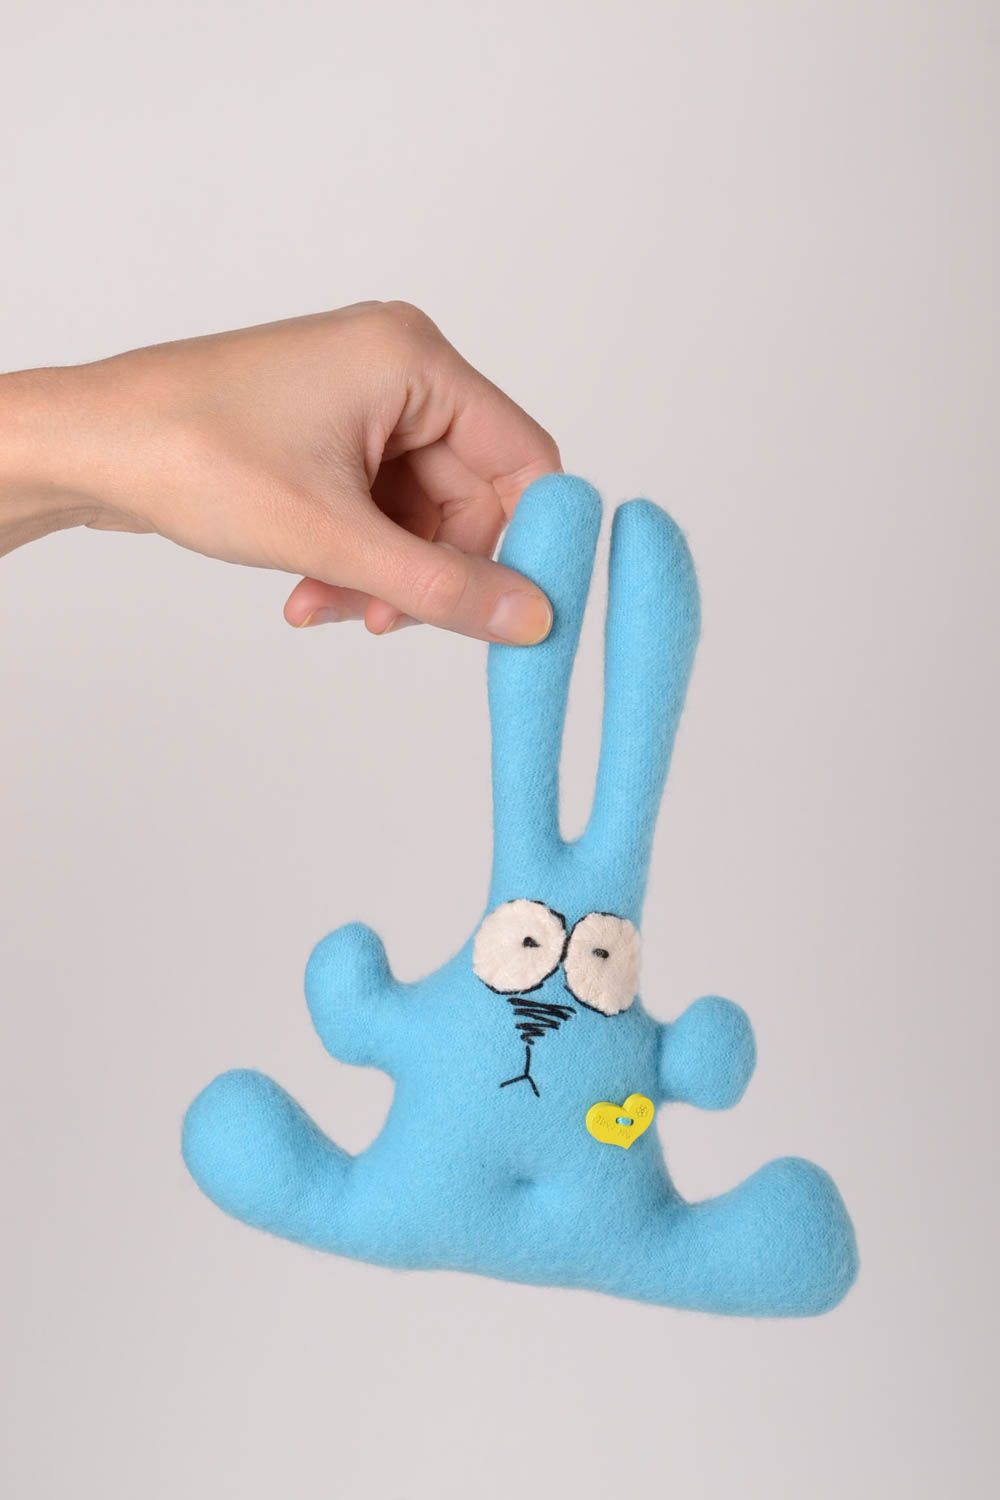 Handmade baby toy fleece handmade toy soft toy bright blue bunny toy toy for kid photo 2